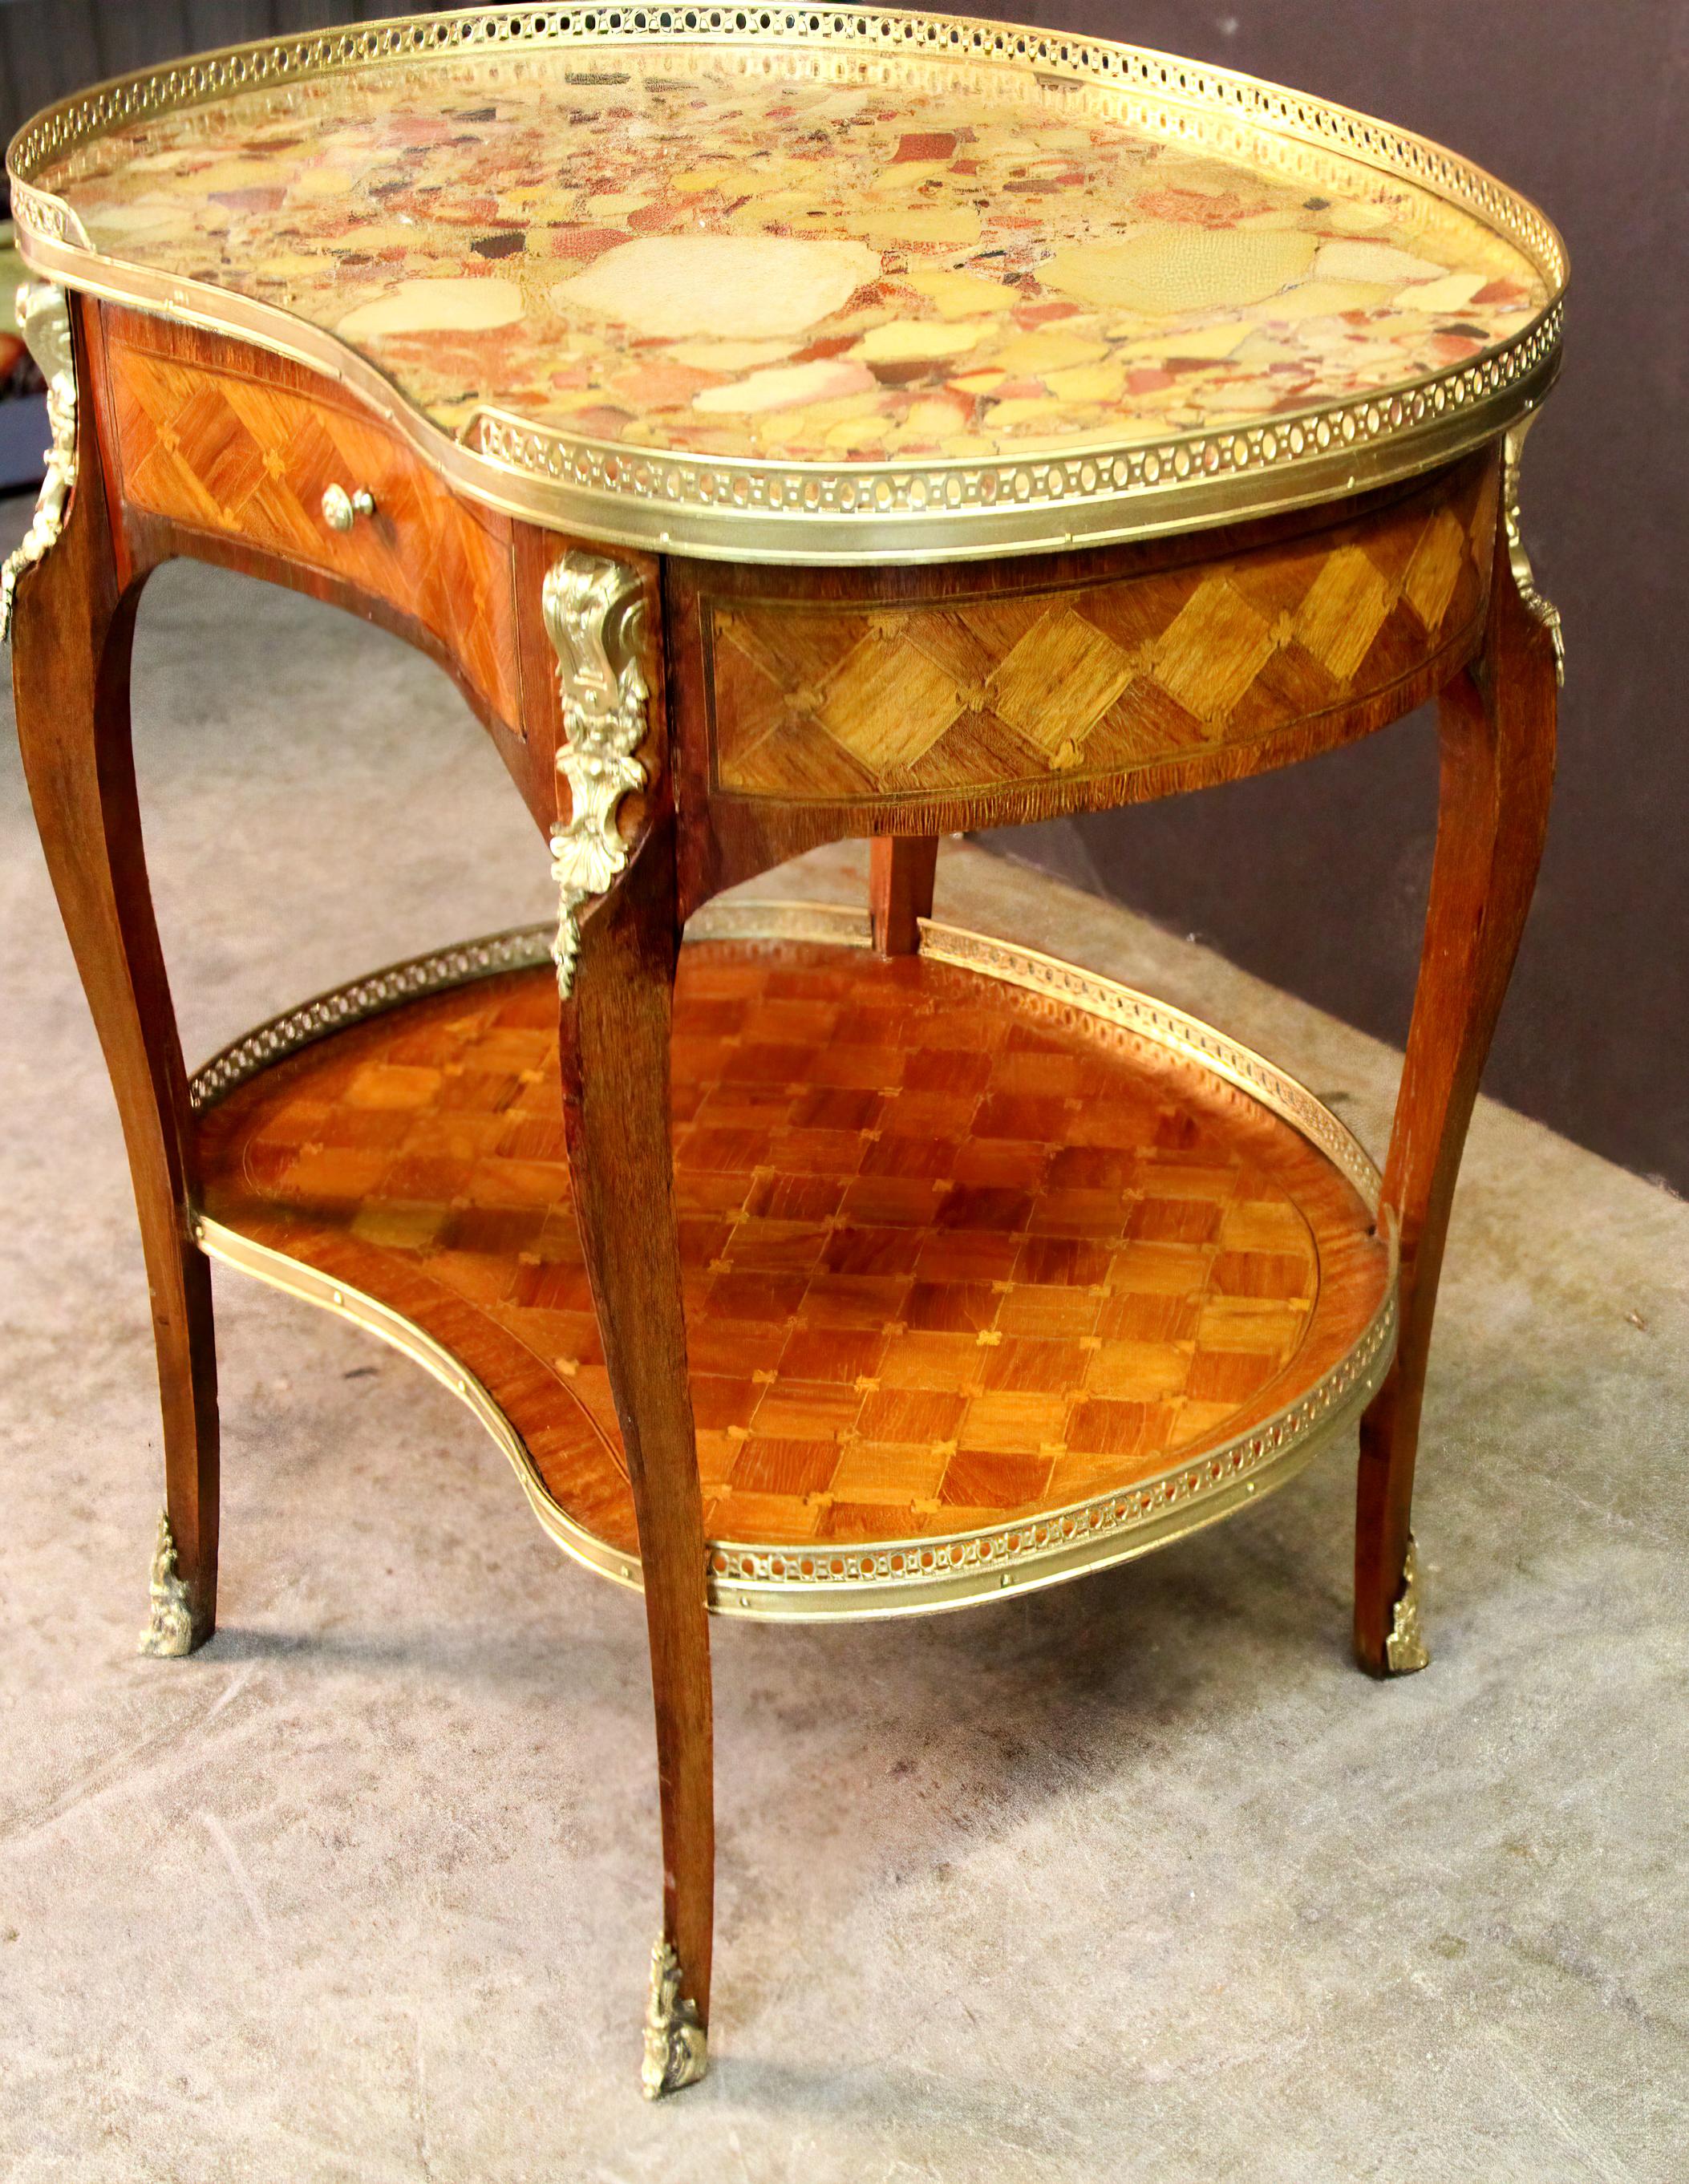 A fine French Louis XV/XVI Transitional kidney shaped kingwood parquetry inlaid side table with a pierced bronze gallery, Breche D 'Alep marble top, single drawer finely chased bronze mounts, a shaped lower lattice inlaid shelf stretcher and bronze